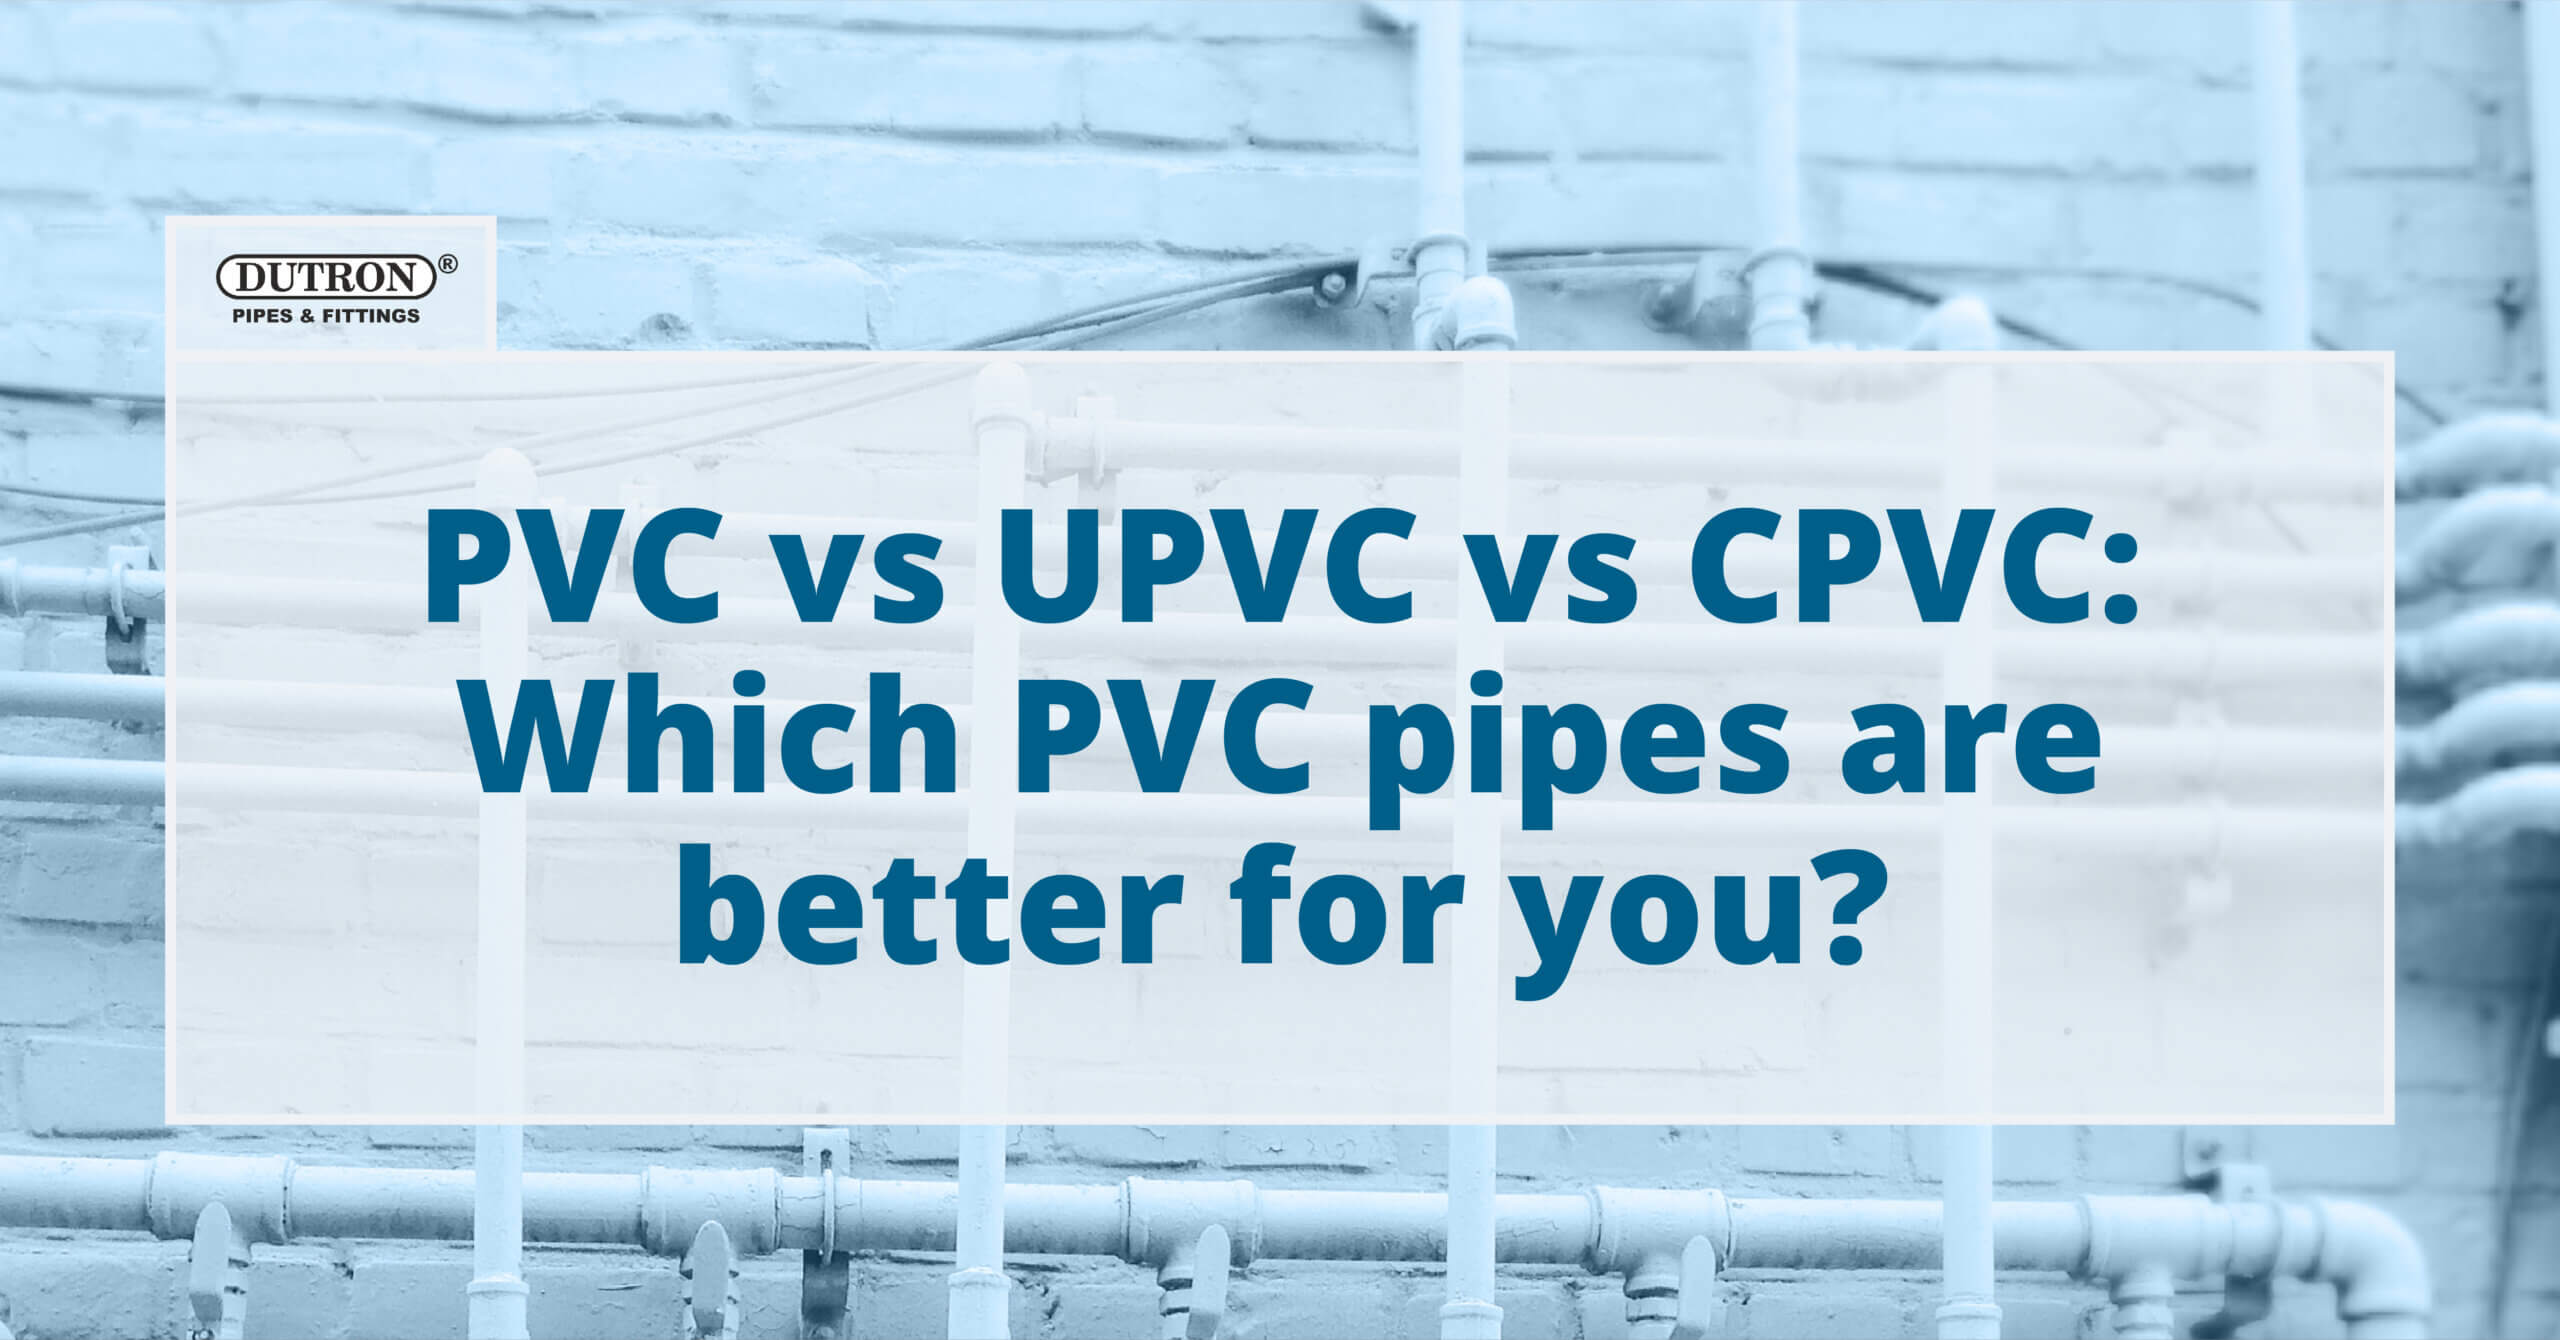 Which PVC pipes are better for you?